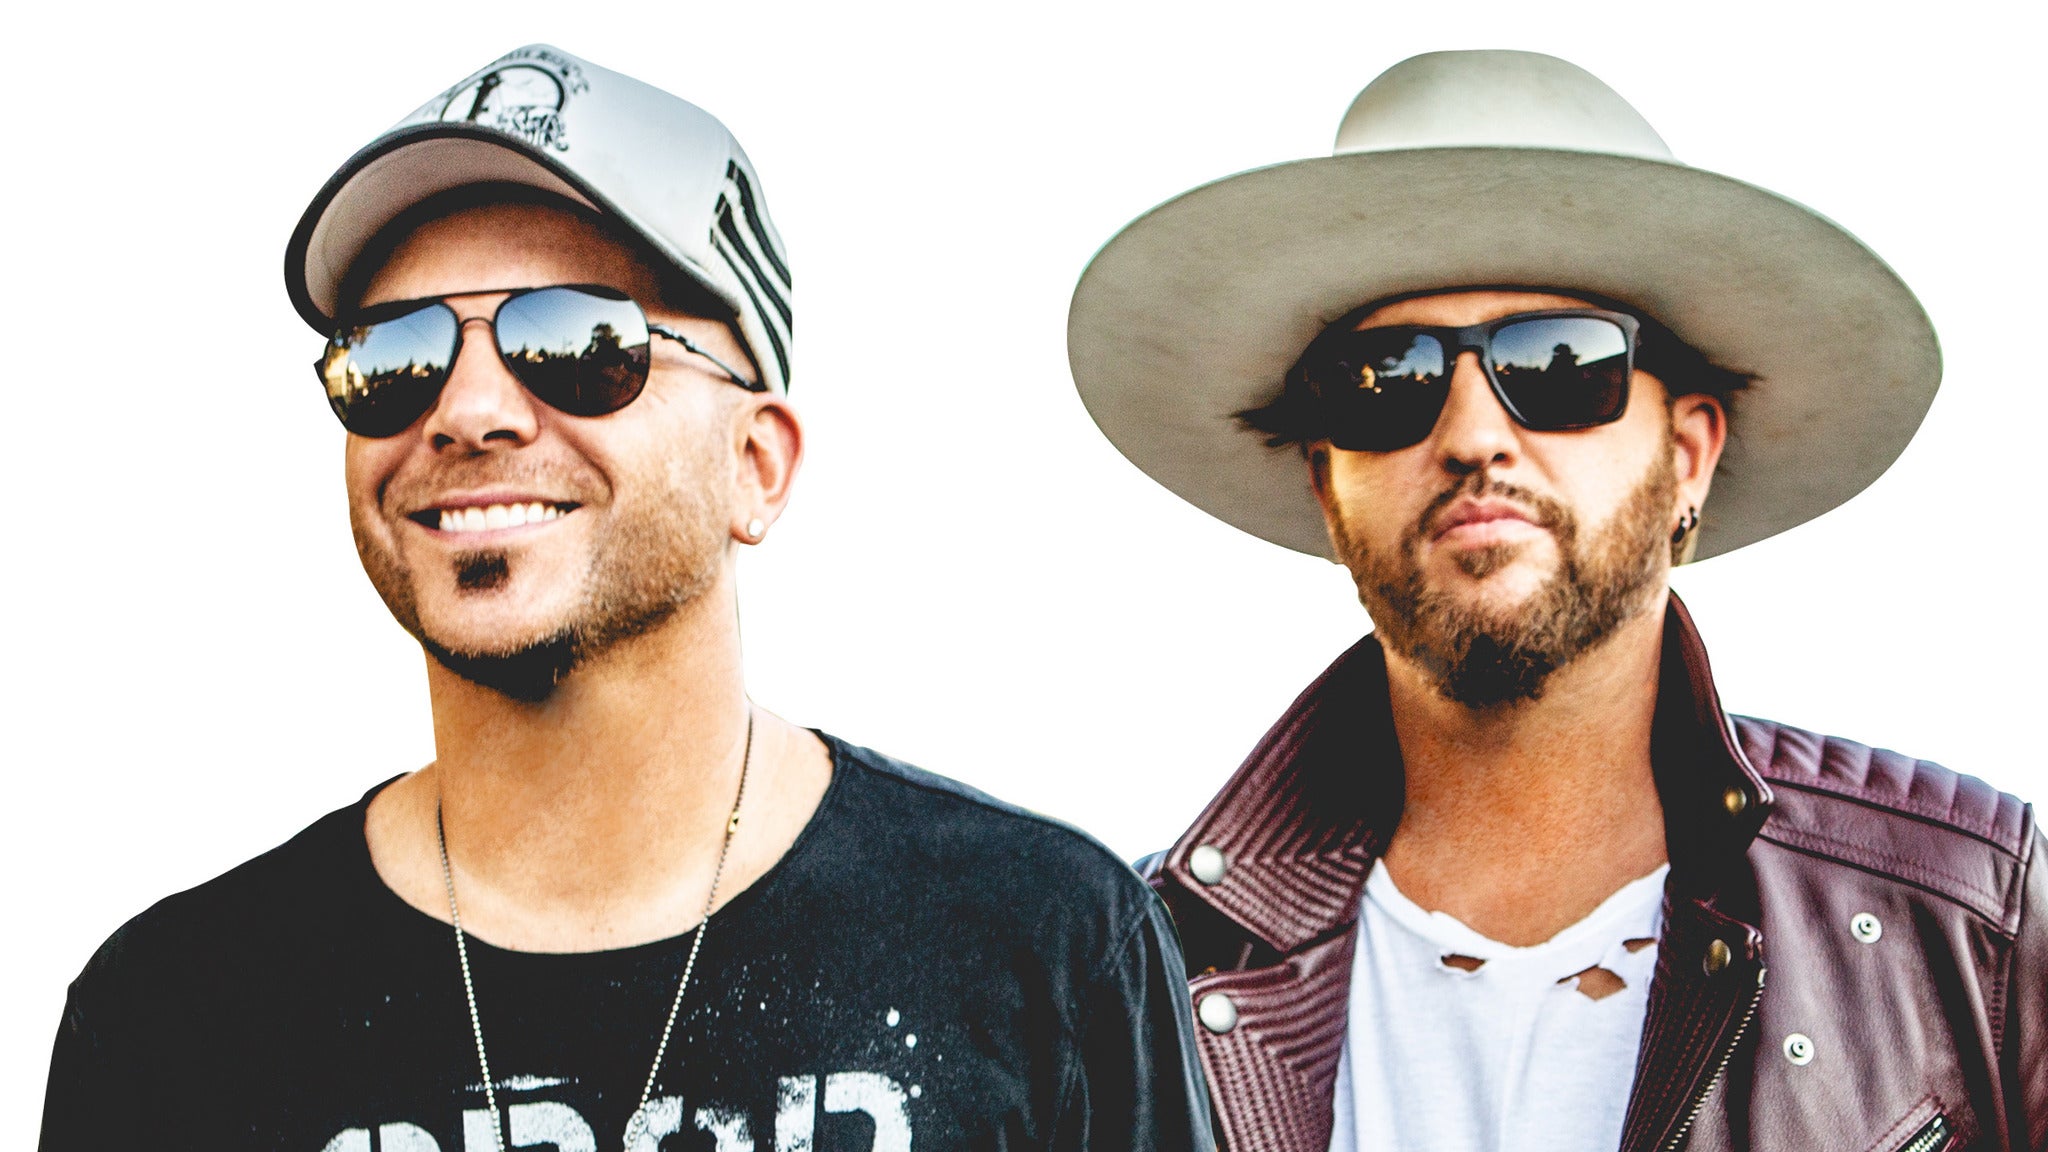 LOCASH in North Myrtle Beach promo photo for Live Nation presale offer code